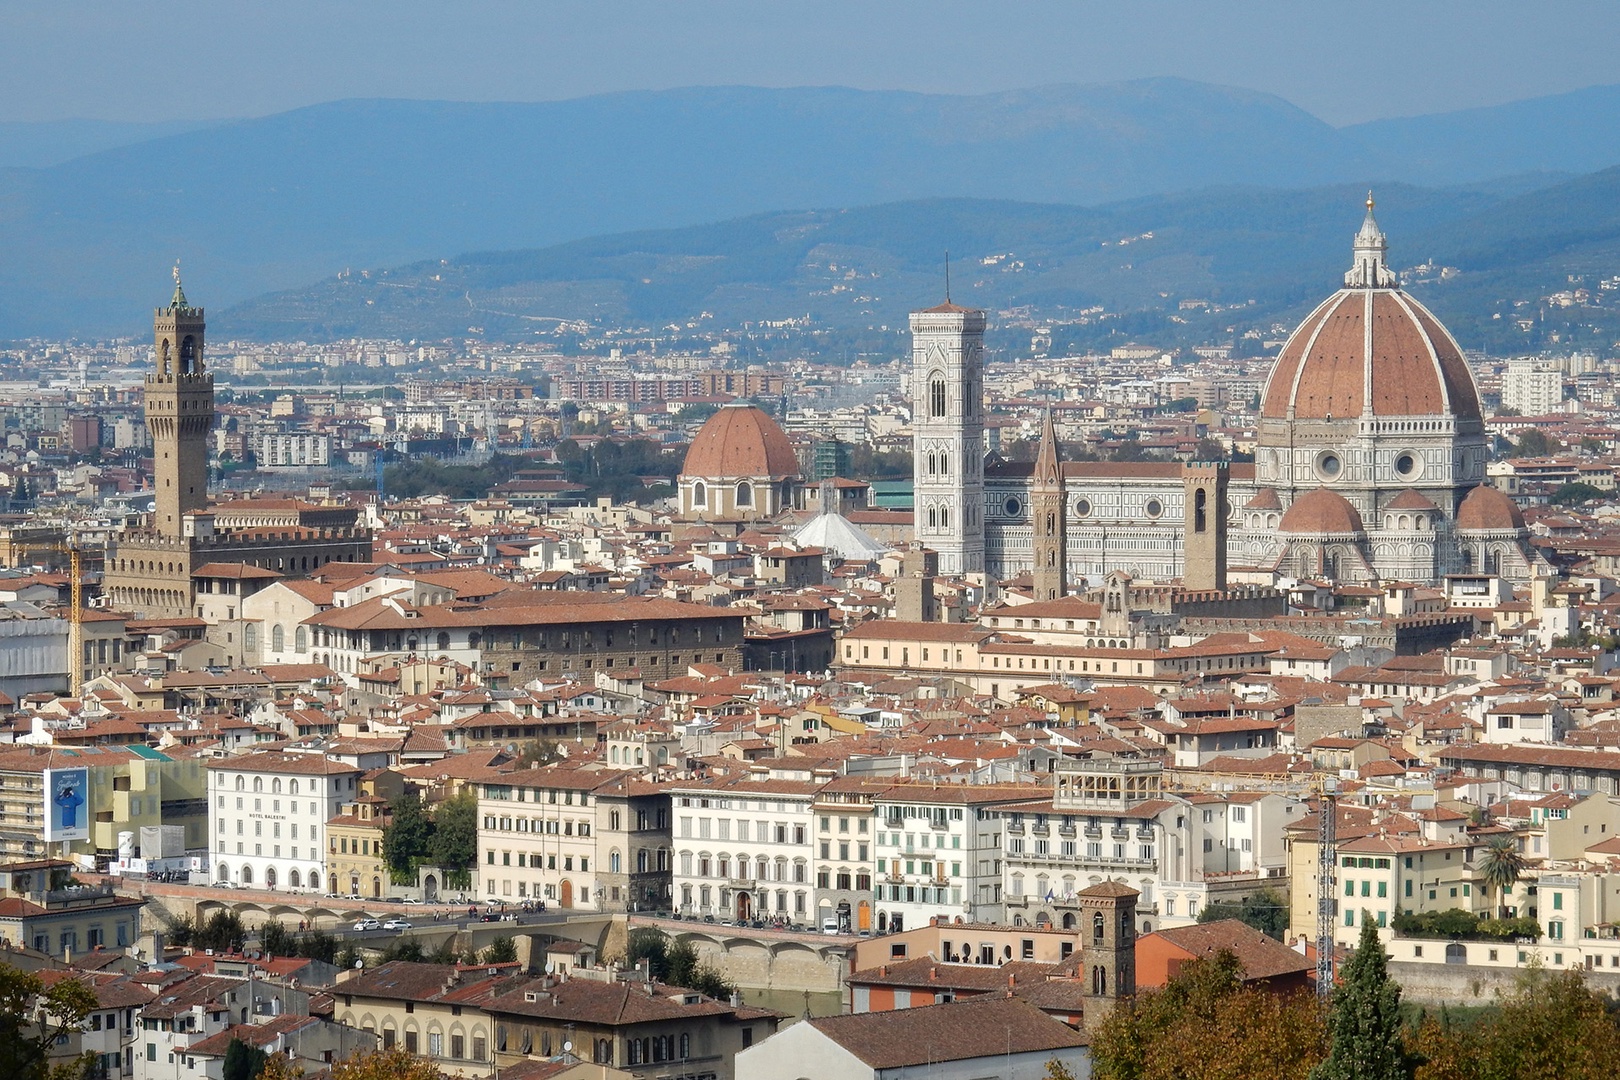 Florence's skyline much as it has appeared for more than 500 years -- beckoning with timeless landmarks.